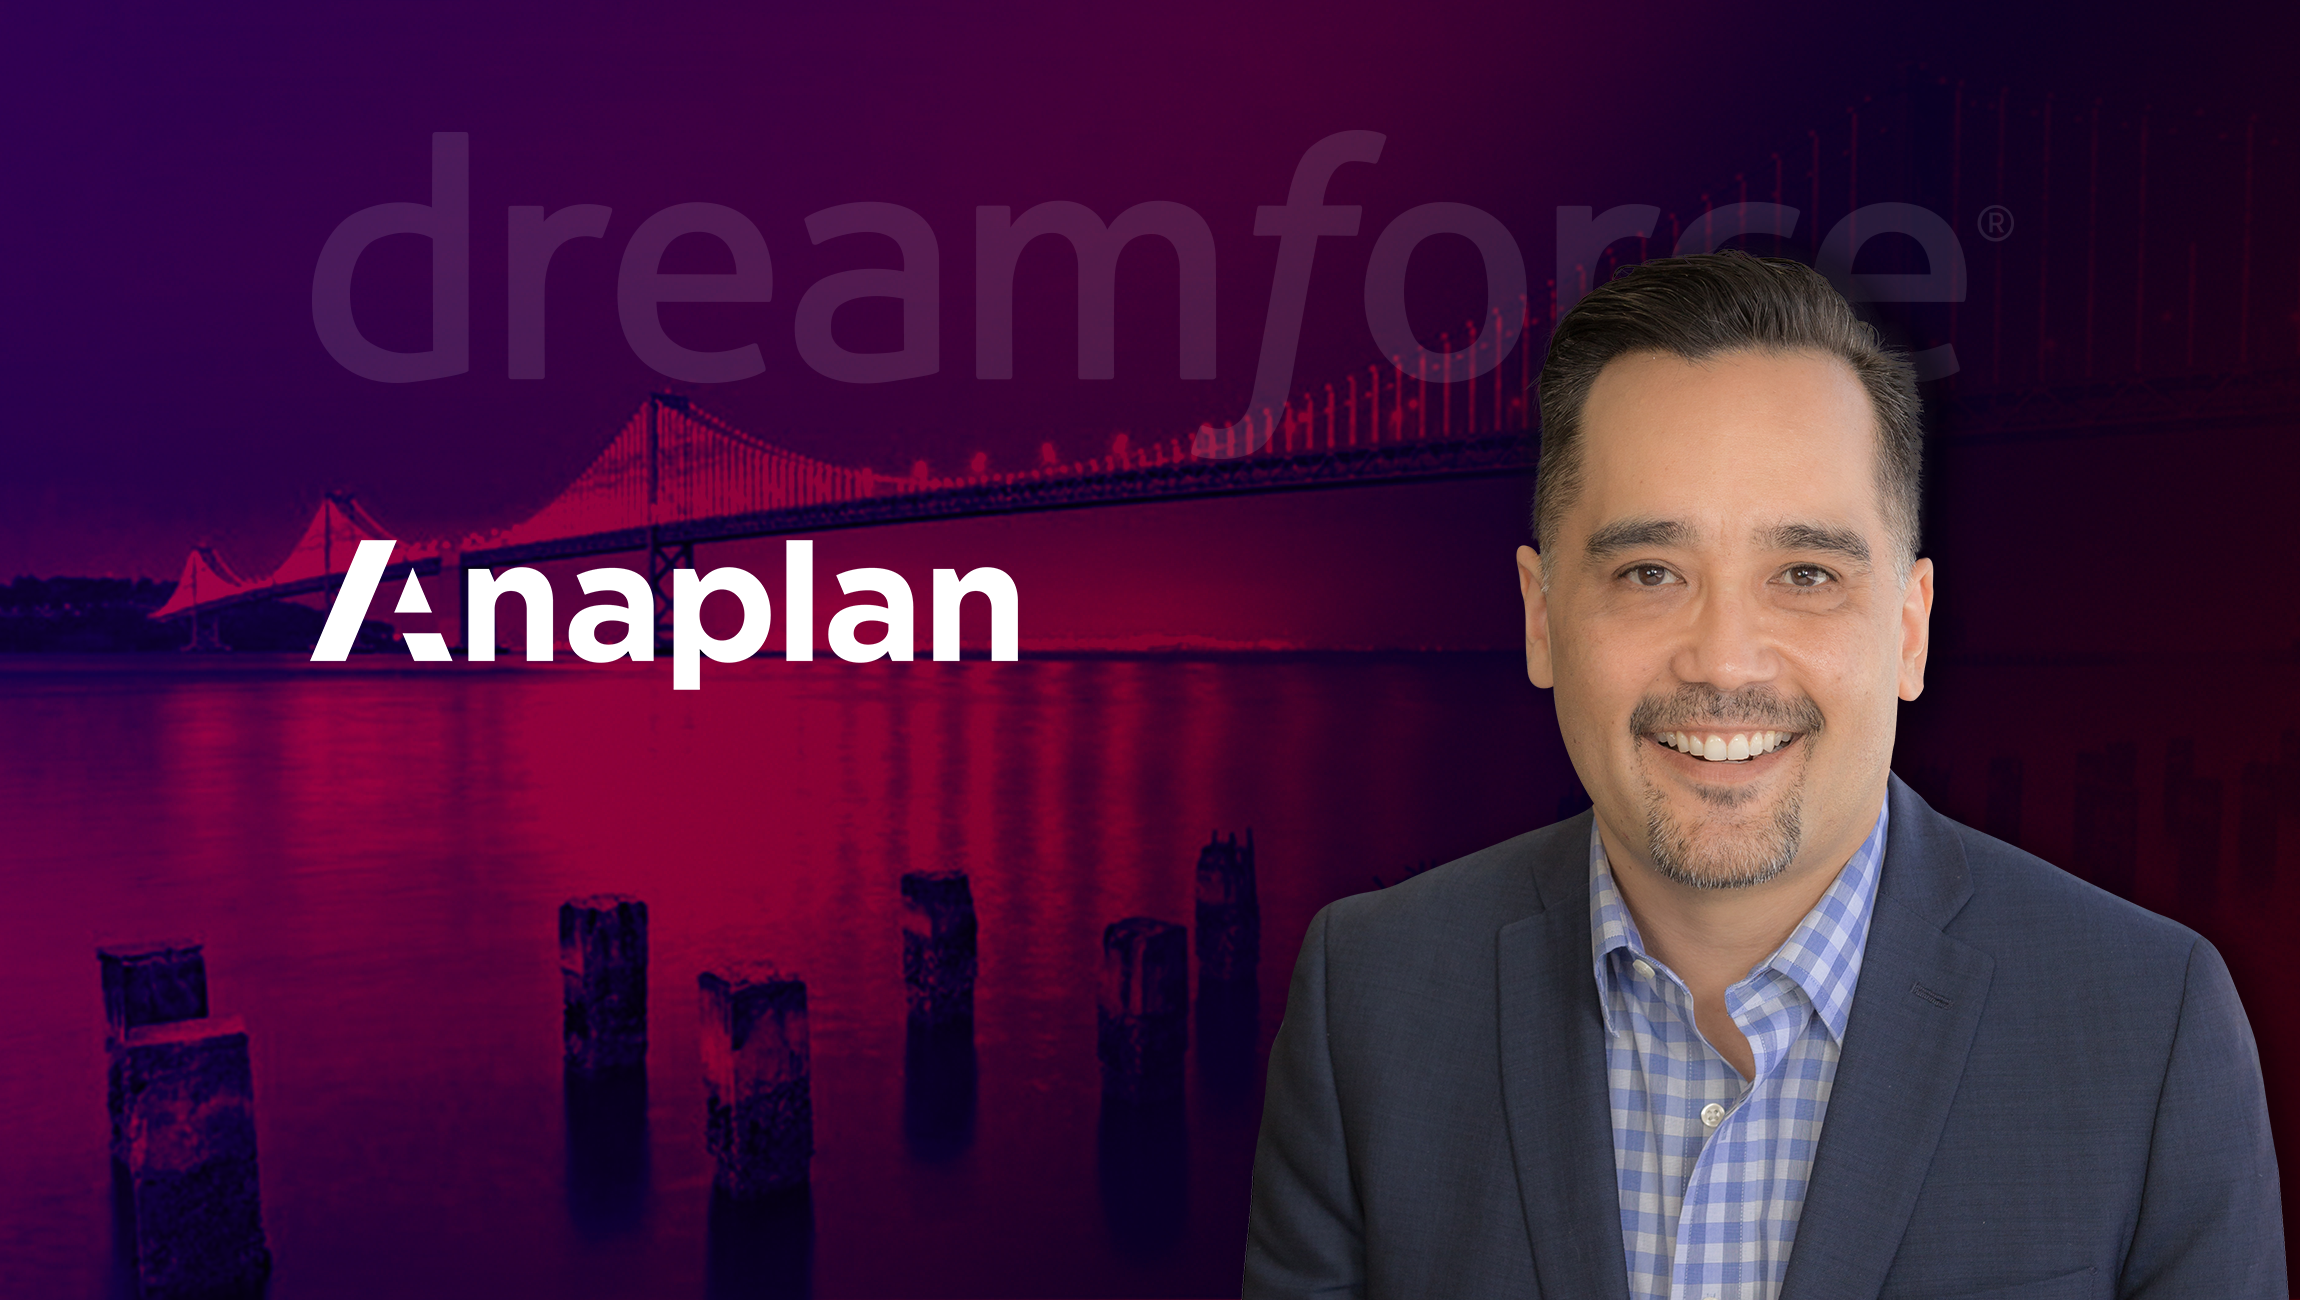 Dreamforce with Jason Loh, Global Head of Sales Solutions at Anaplan